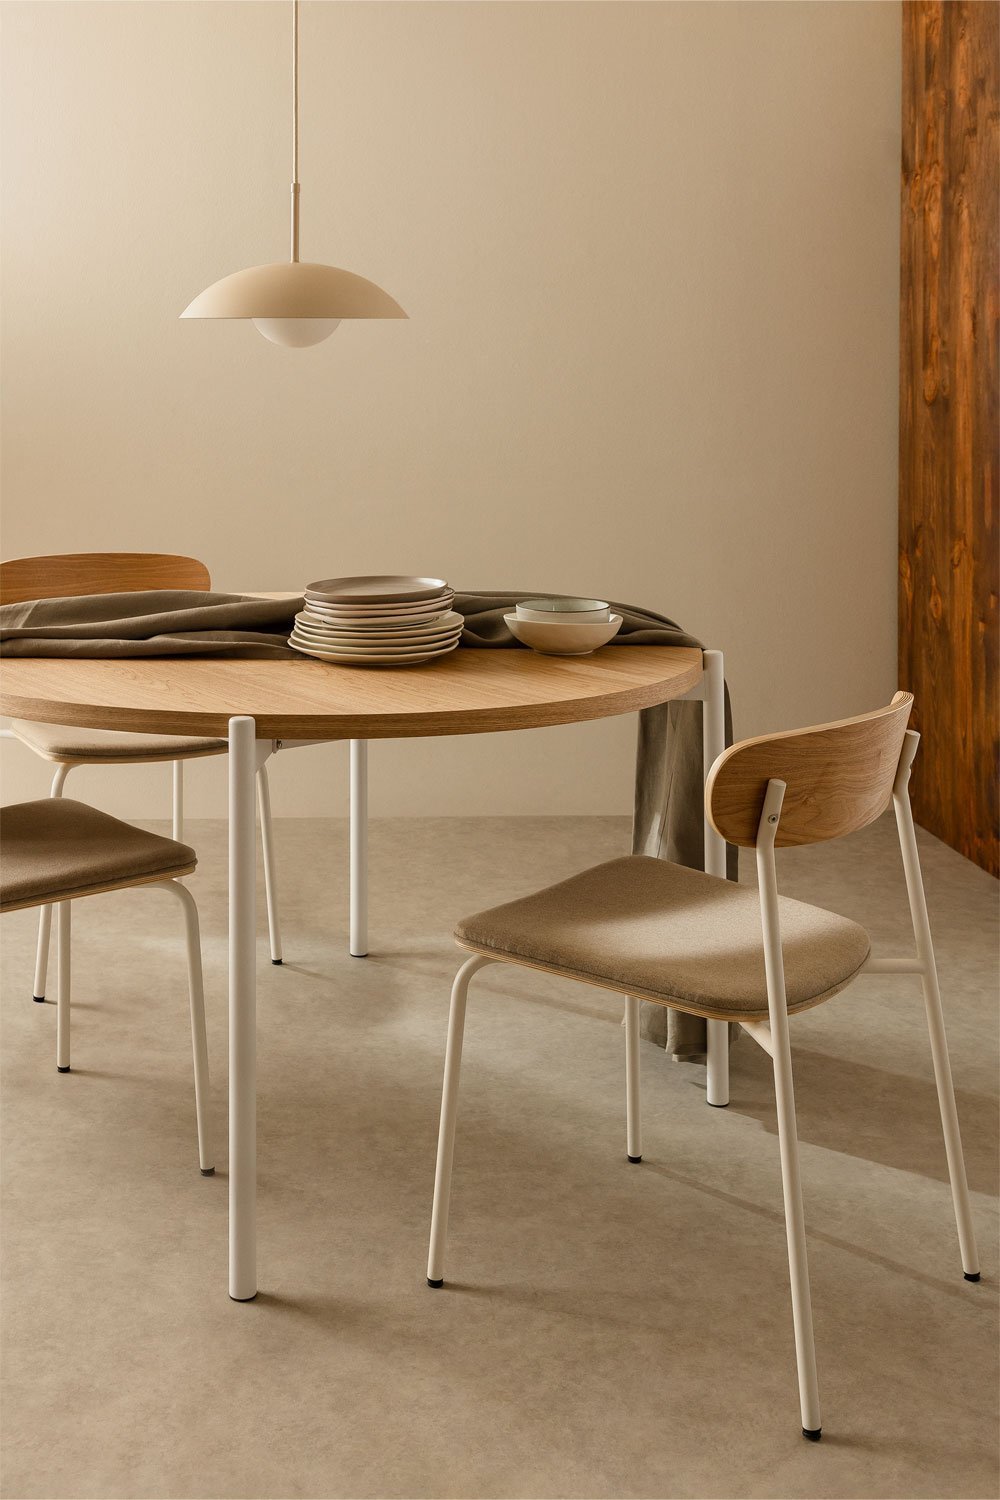 Galite Round Dining Table in Wood and Metal (Ø120 cm), gallery image 1